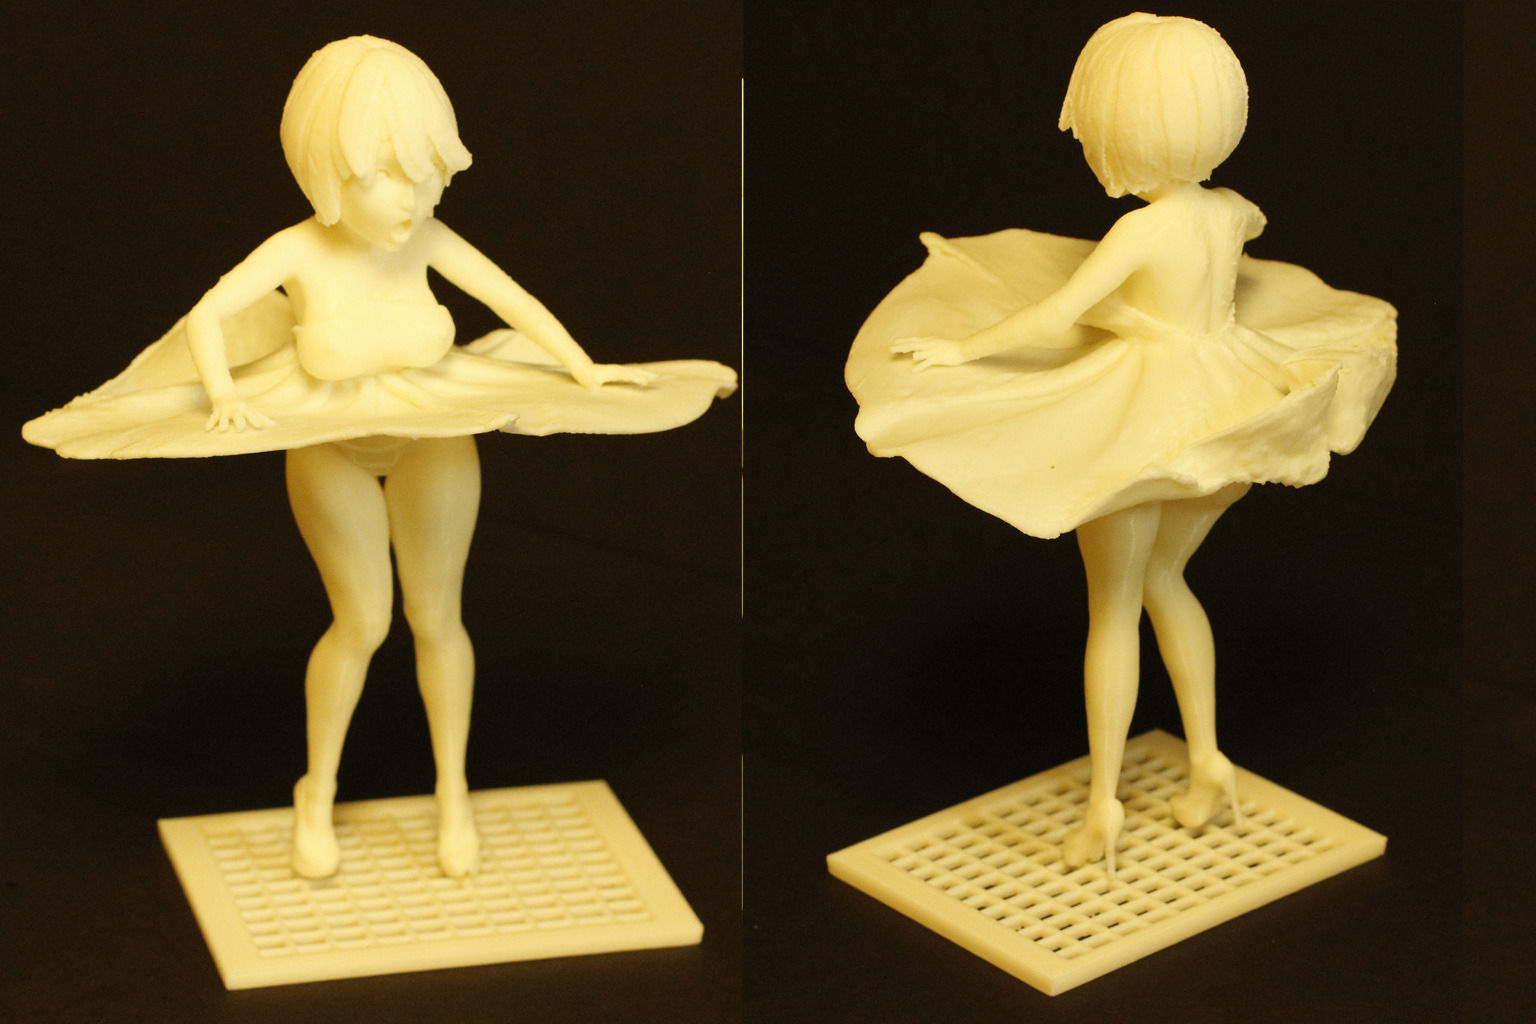 Anime Figurines for 3D Printing - Gambody, 3D Printing Blog